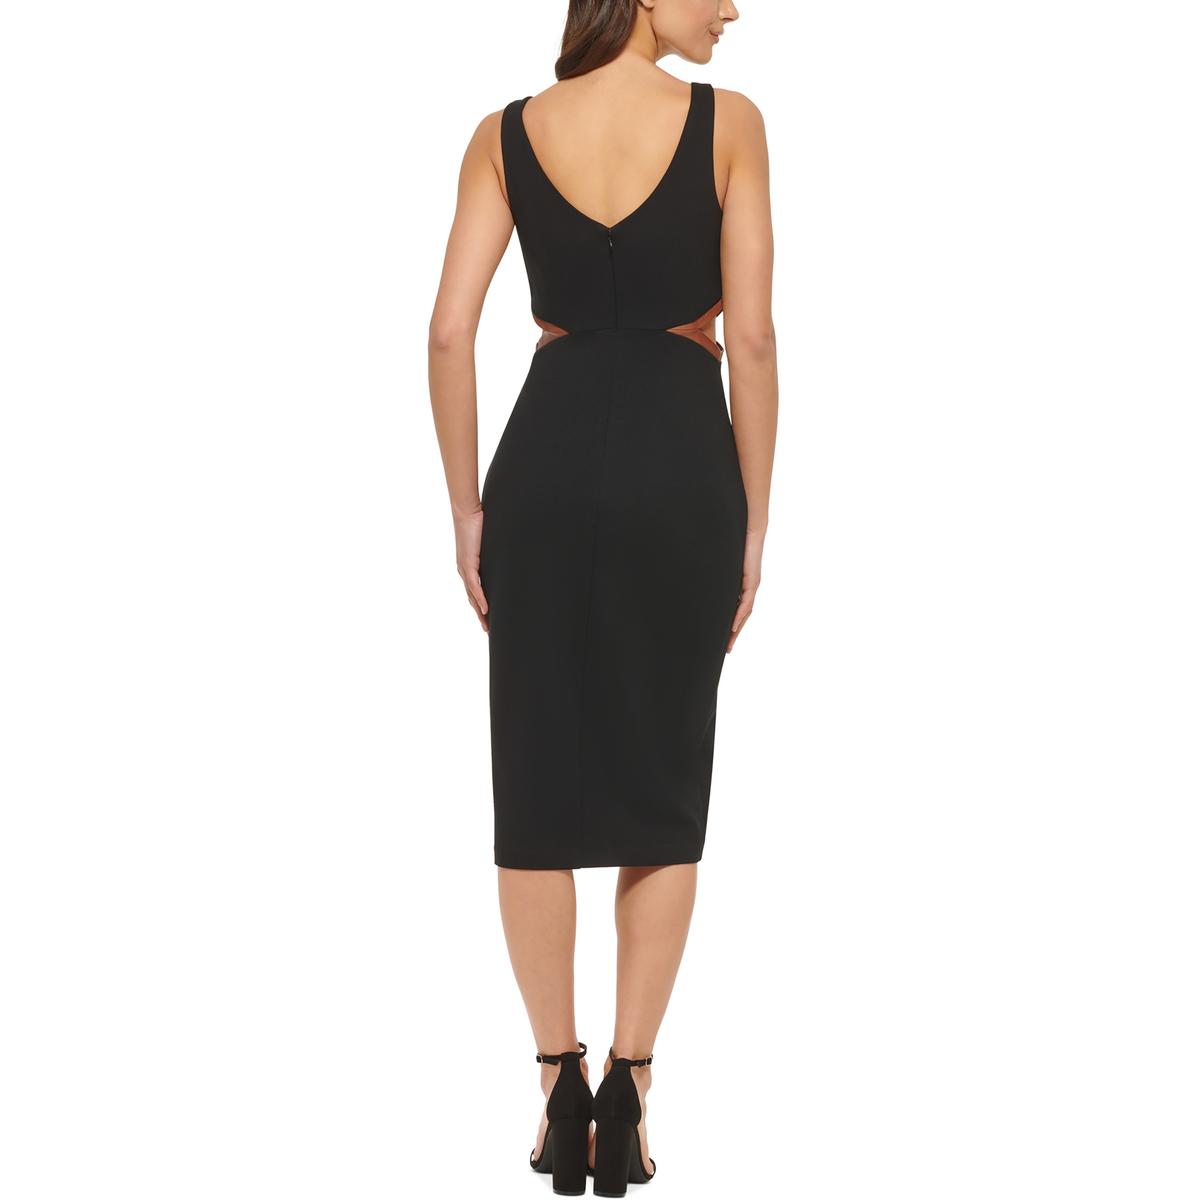 Guess Womens Faux Leather Trim Cut Out Bodycon Dress